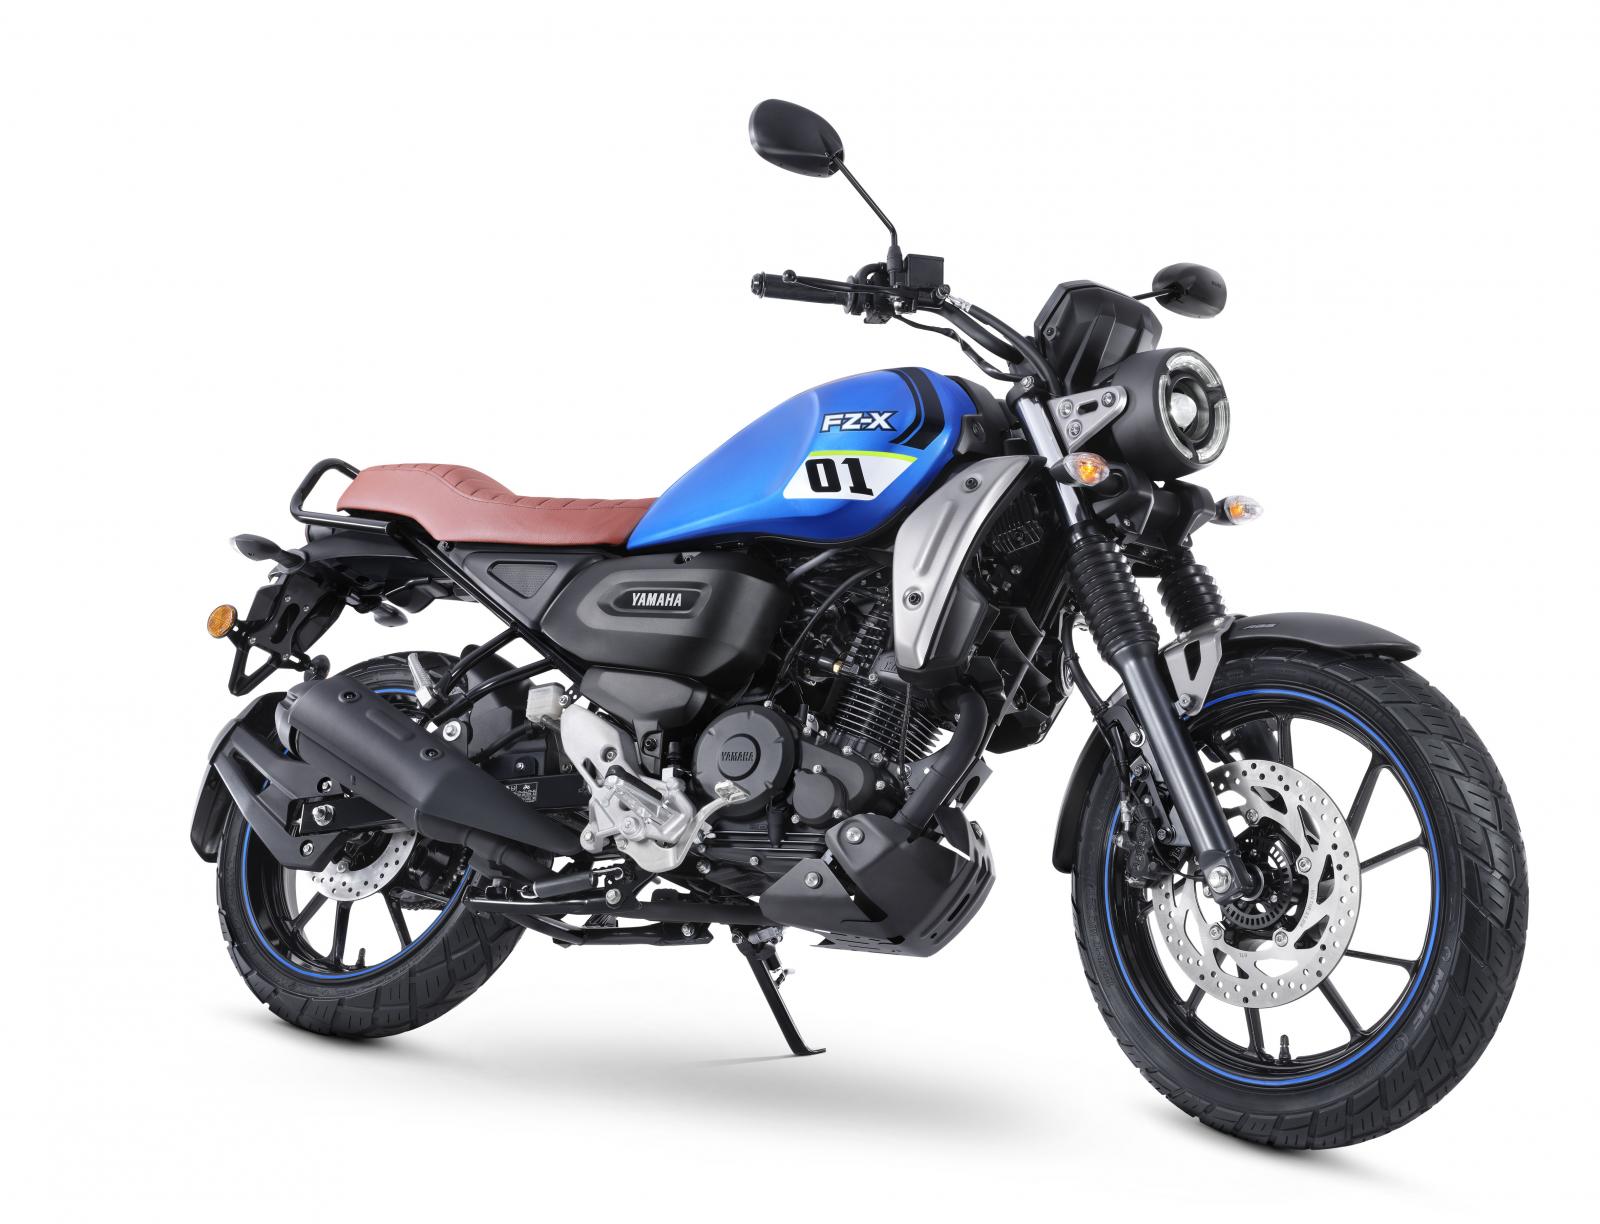 New Yamaha FZ-X with Neo-Retro Design & Bluetooth Launched